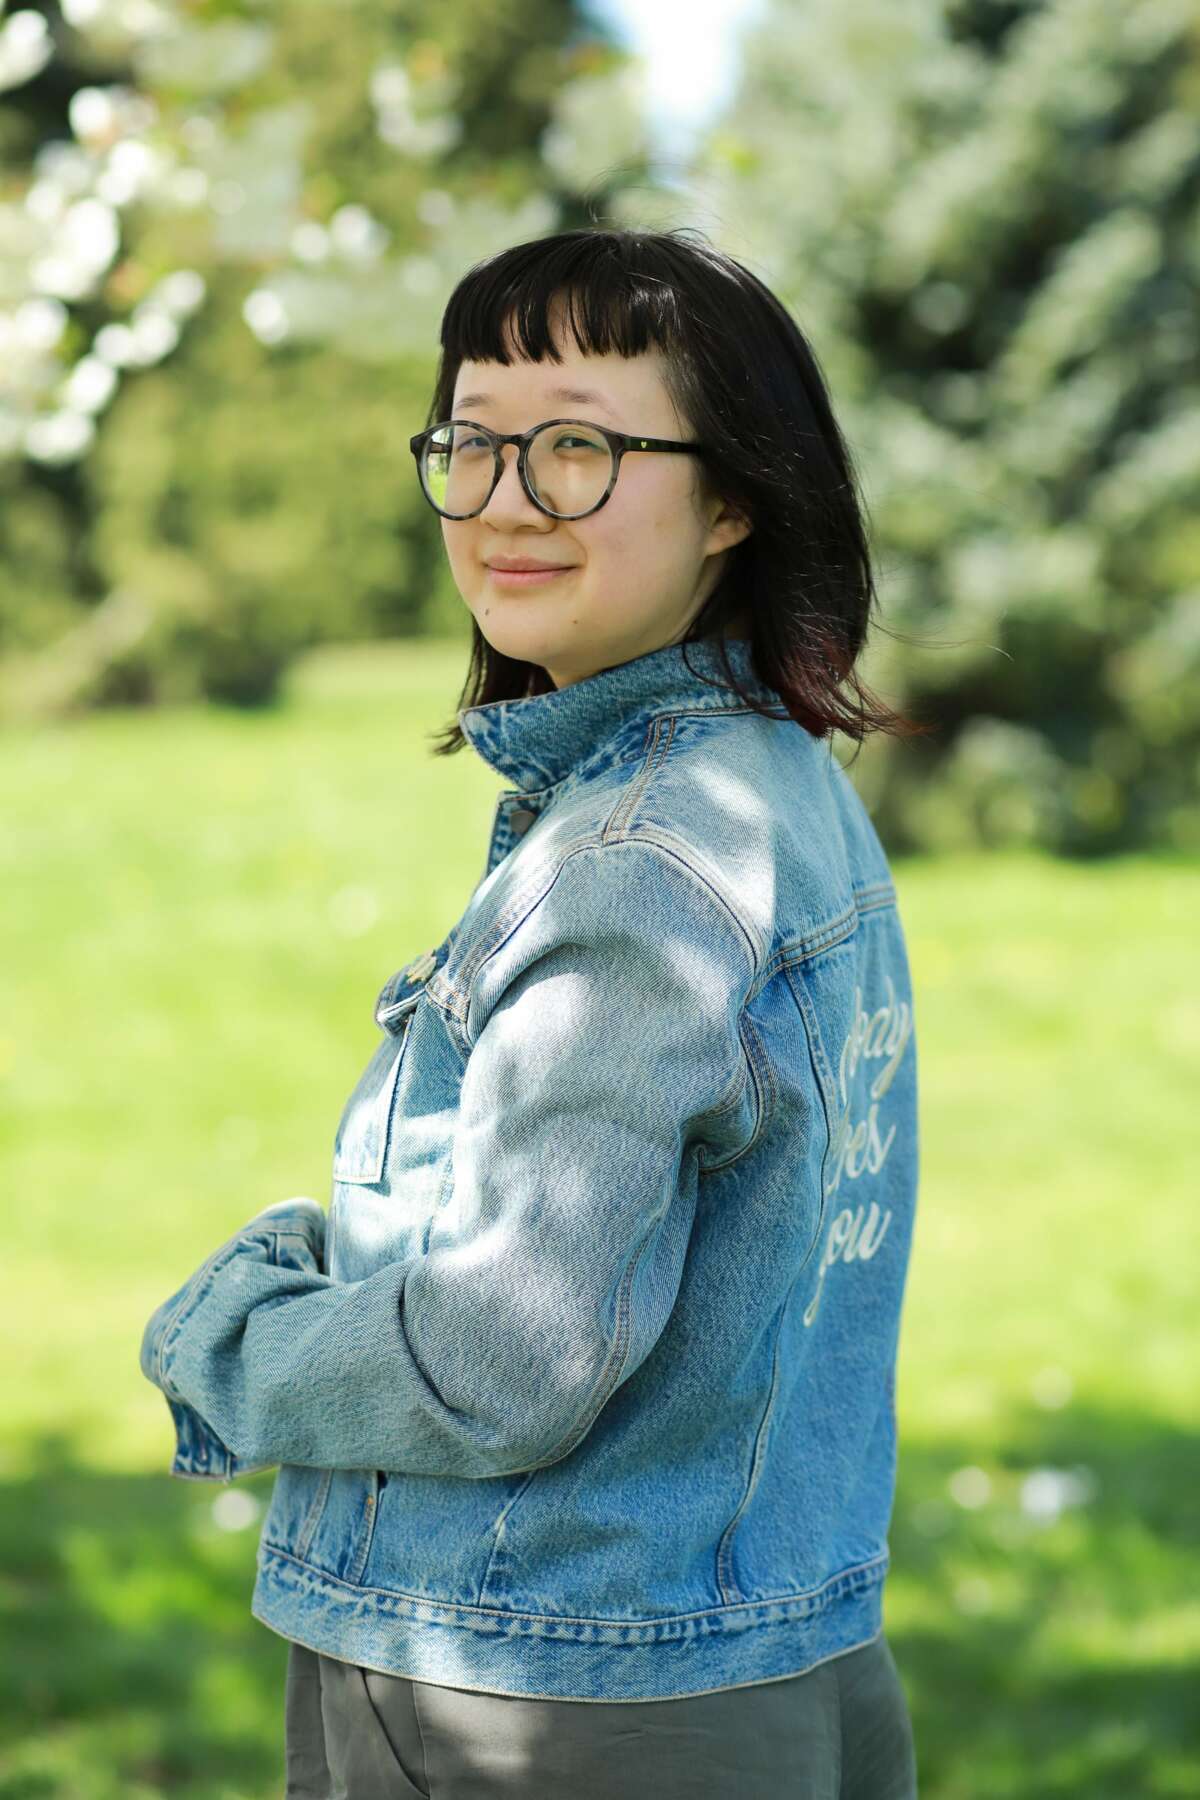 Photo of Jane Shi, a person with pale tan skin. Jane's body is facing away from the camera, but her face smiling towards it. She's wearing a blue jean jacket with the words "Nobody Loves You" embroidered in white across its back. Her hair is nearly shoulder-length with dark red highlights at the ends. She is wearing large, round, black-grey glasses. The background is a park with lawn grass and trees, out of focus.